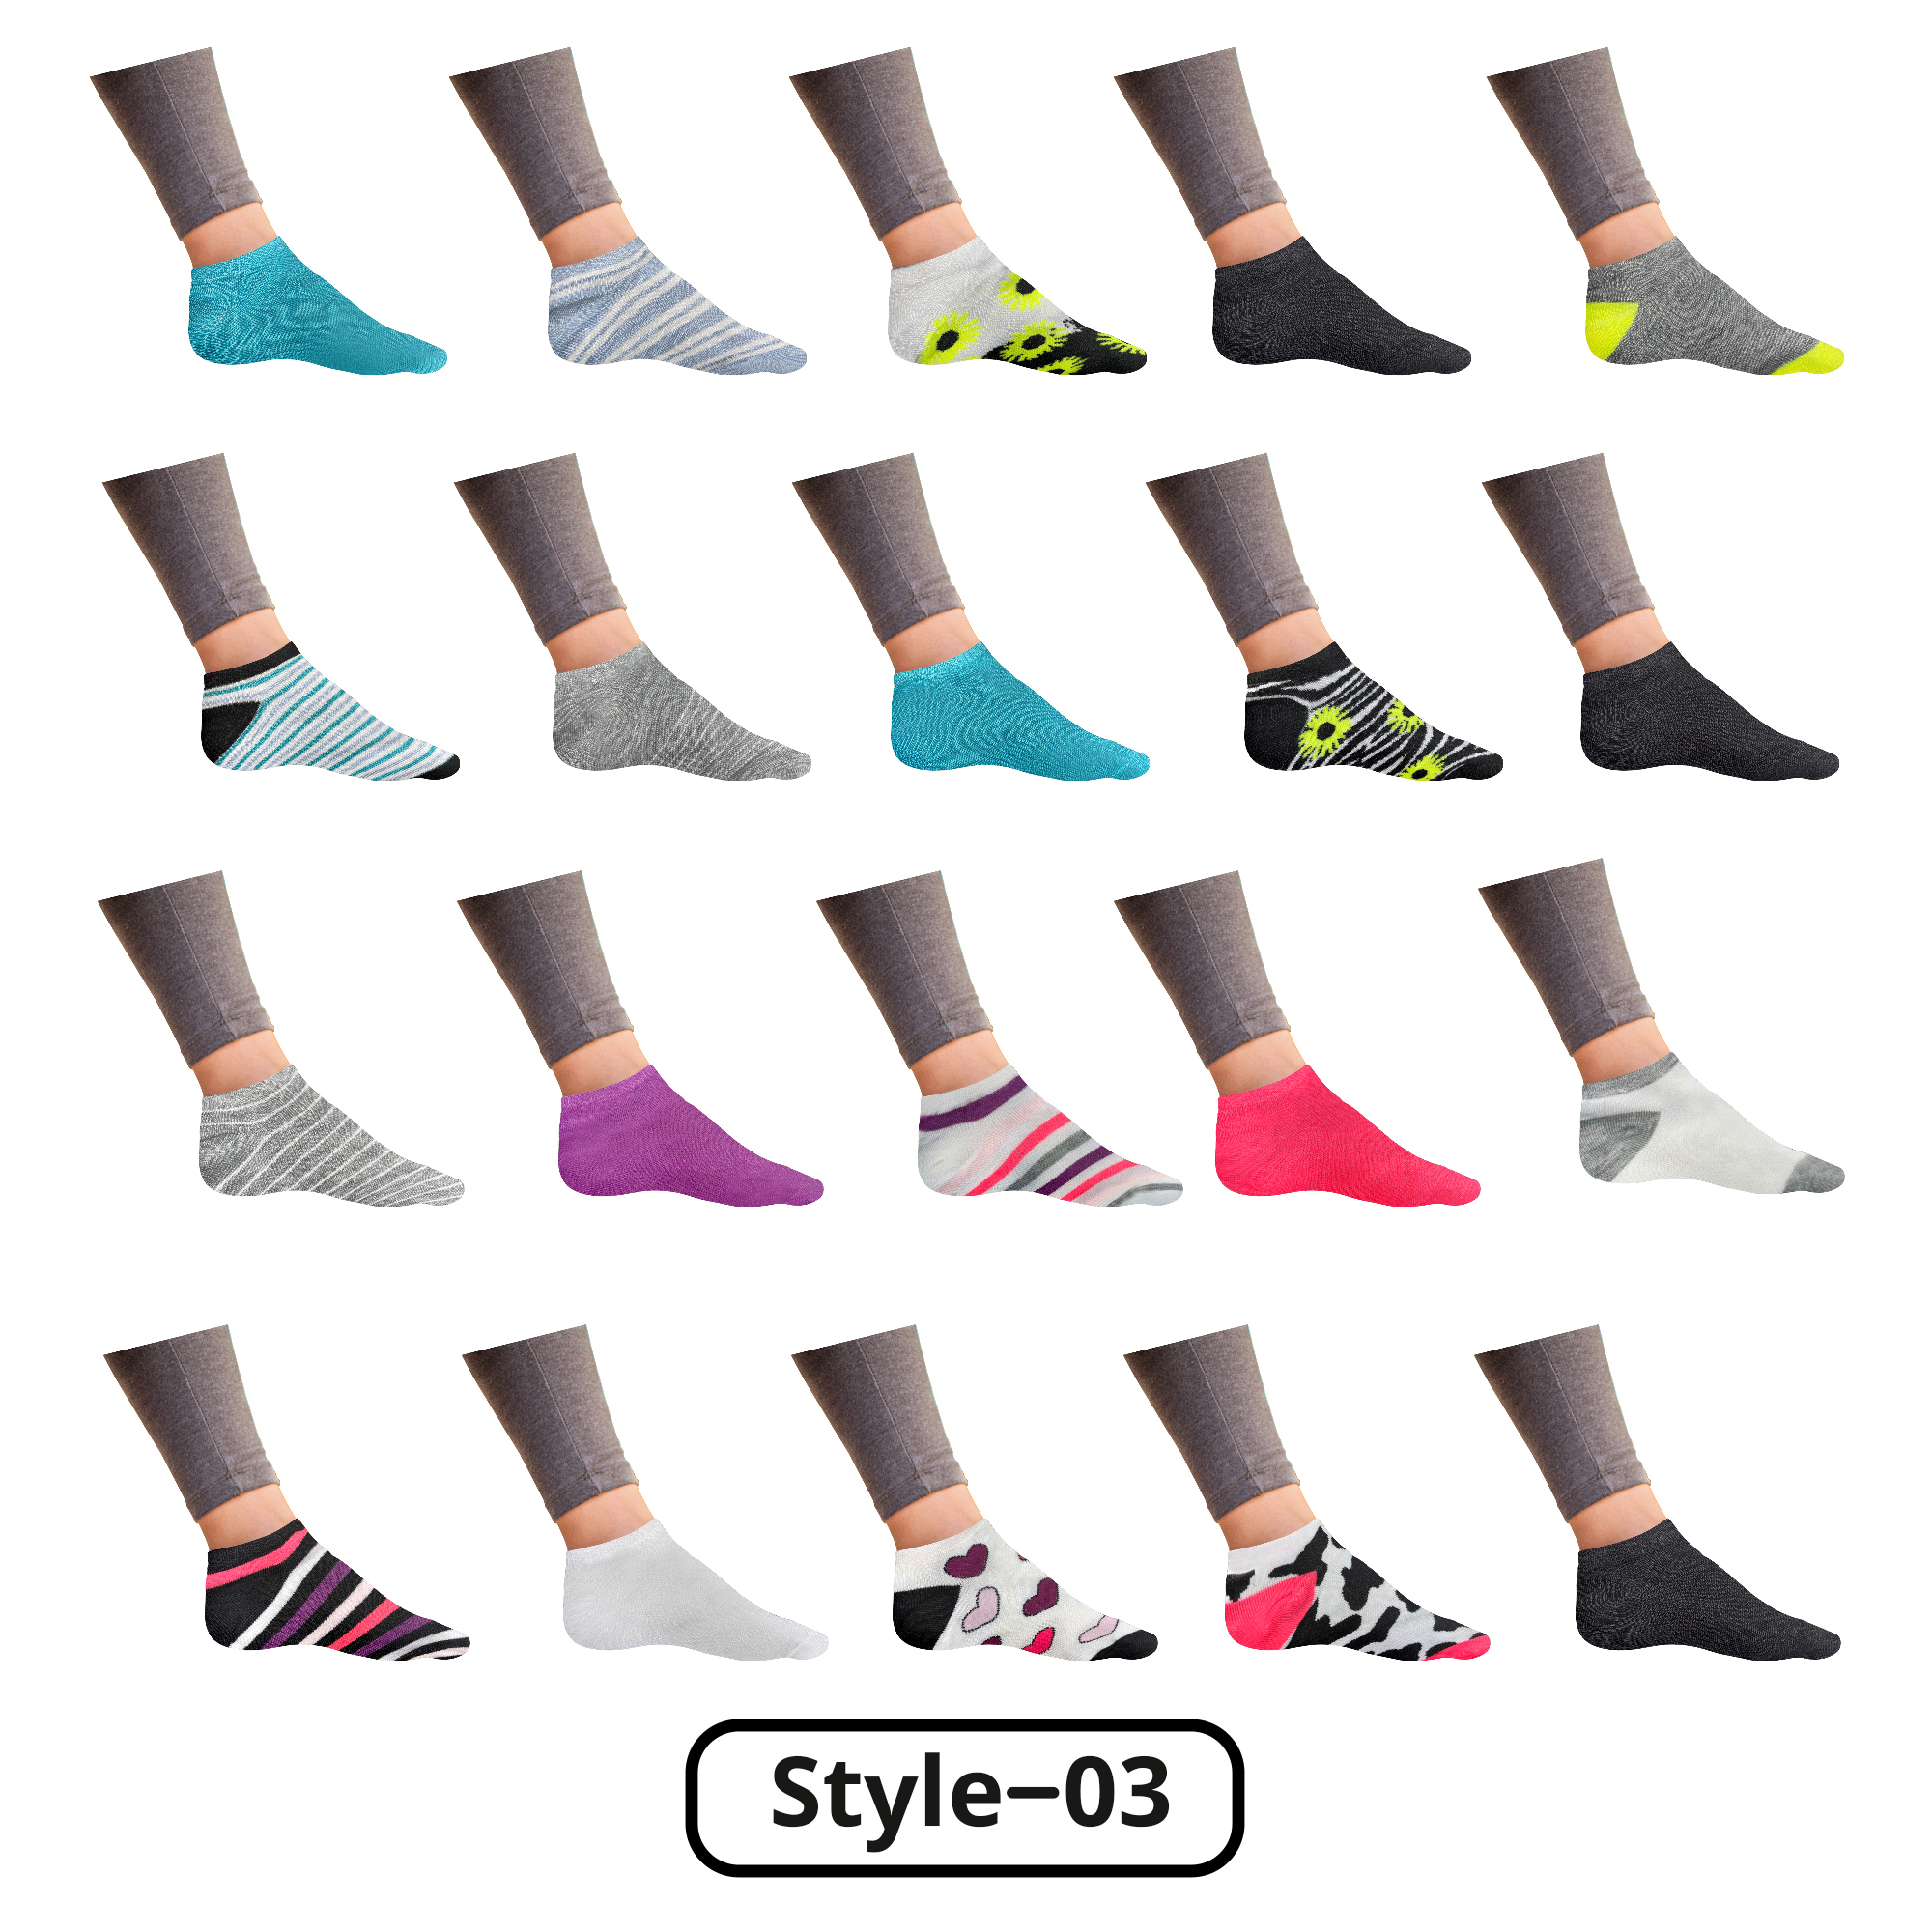 20-Pairs: Women’s Breathable Stylish Colorful Fun No Show Low Cut Ankle Socks - Style 1